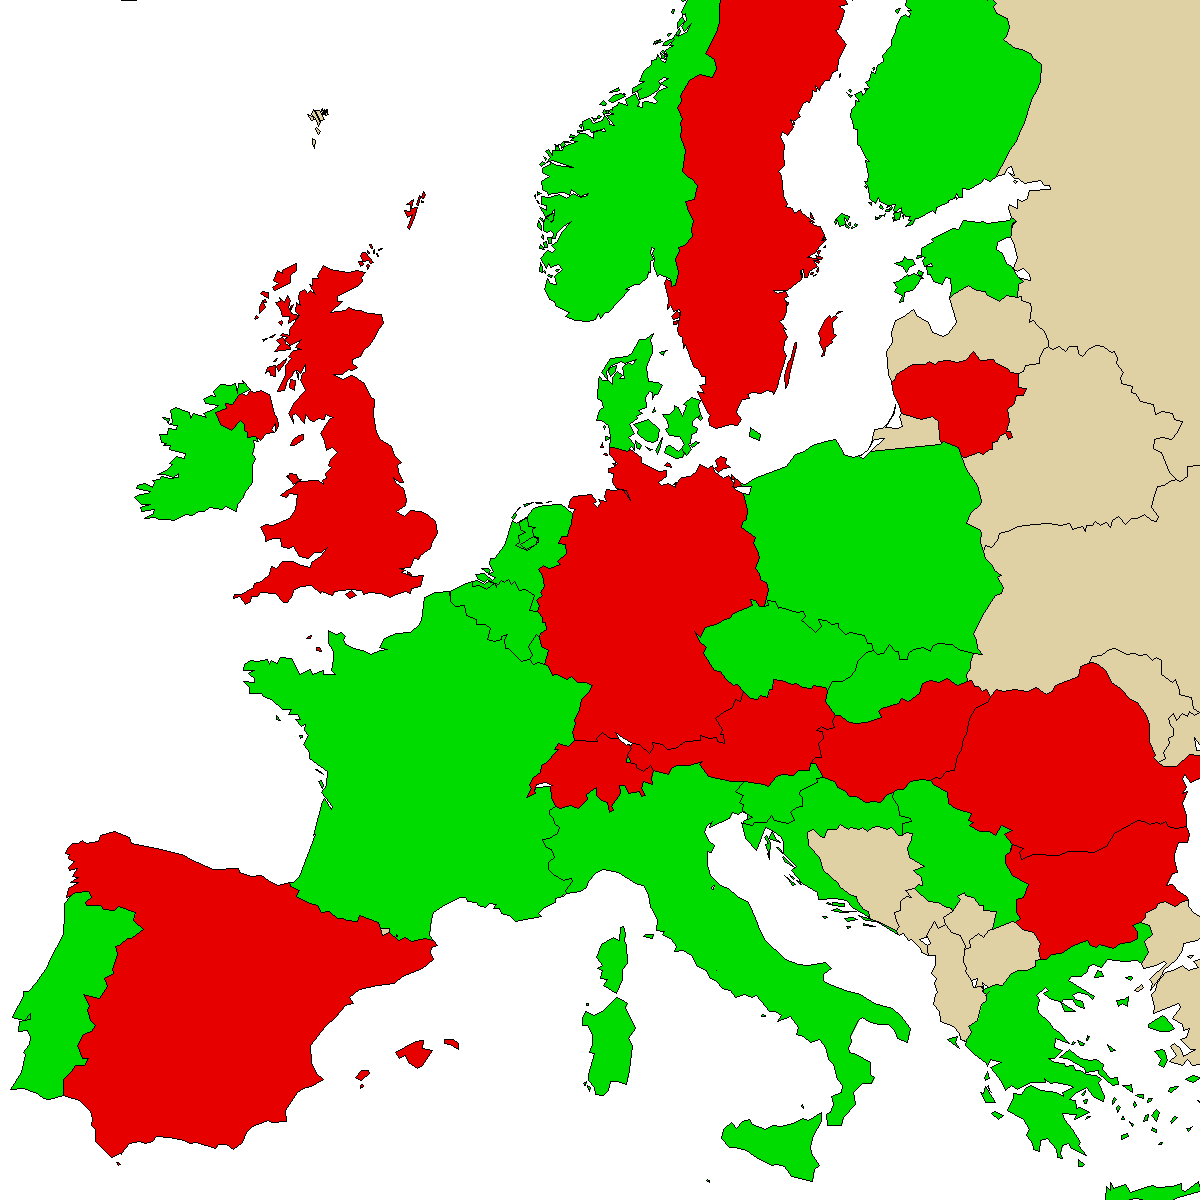 legal info map for our product O-PCE, green are countries with no ban, red with ban, grey is unknown